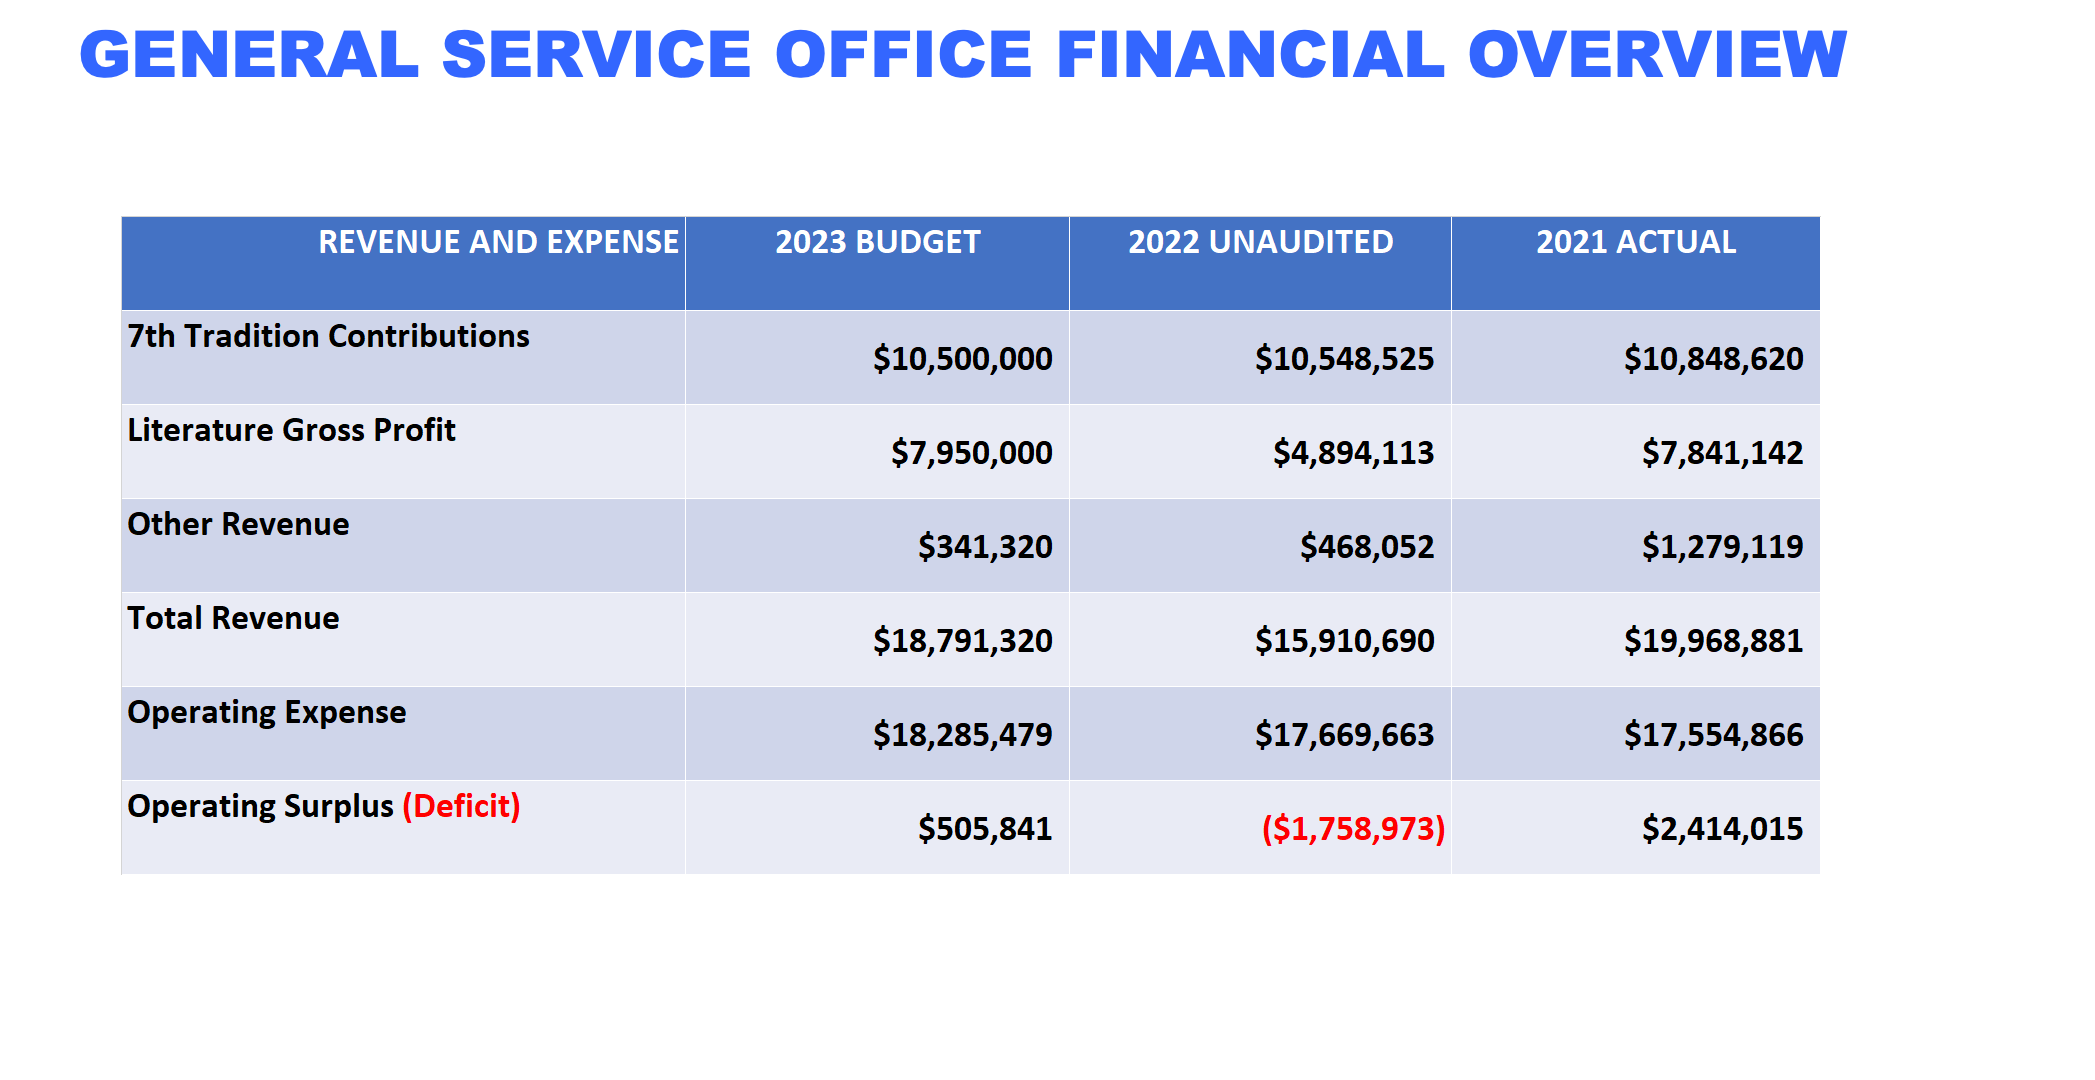 General Service Office Financial Overview